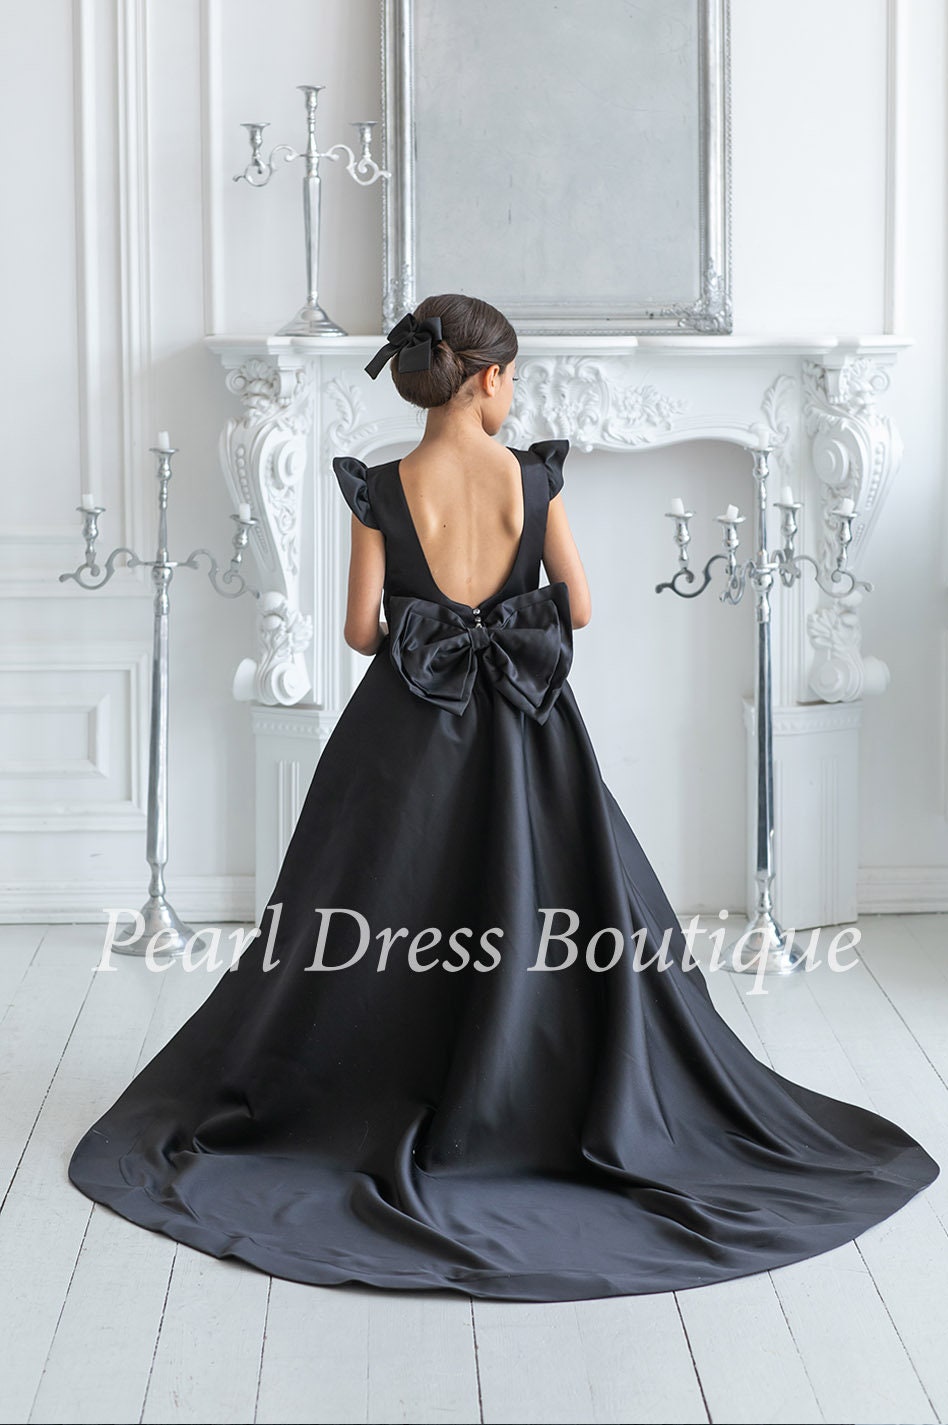 Buy Black Satin Gown for Women Online from India's Luxury Designers 2024